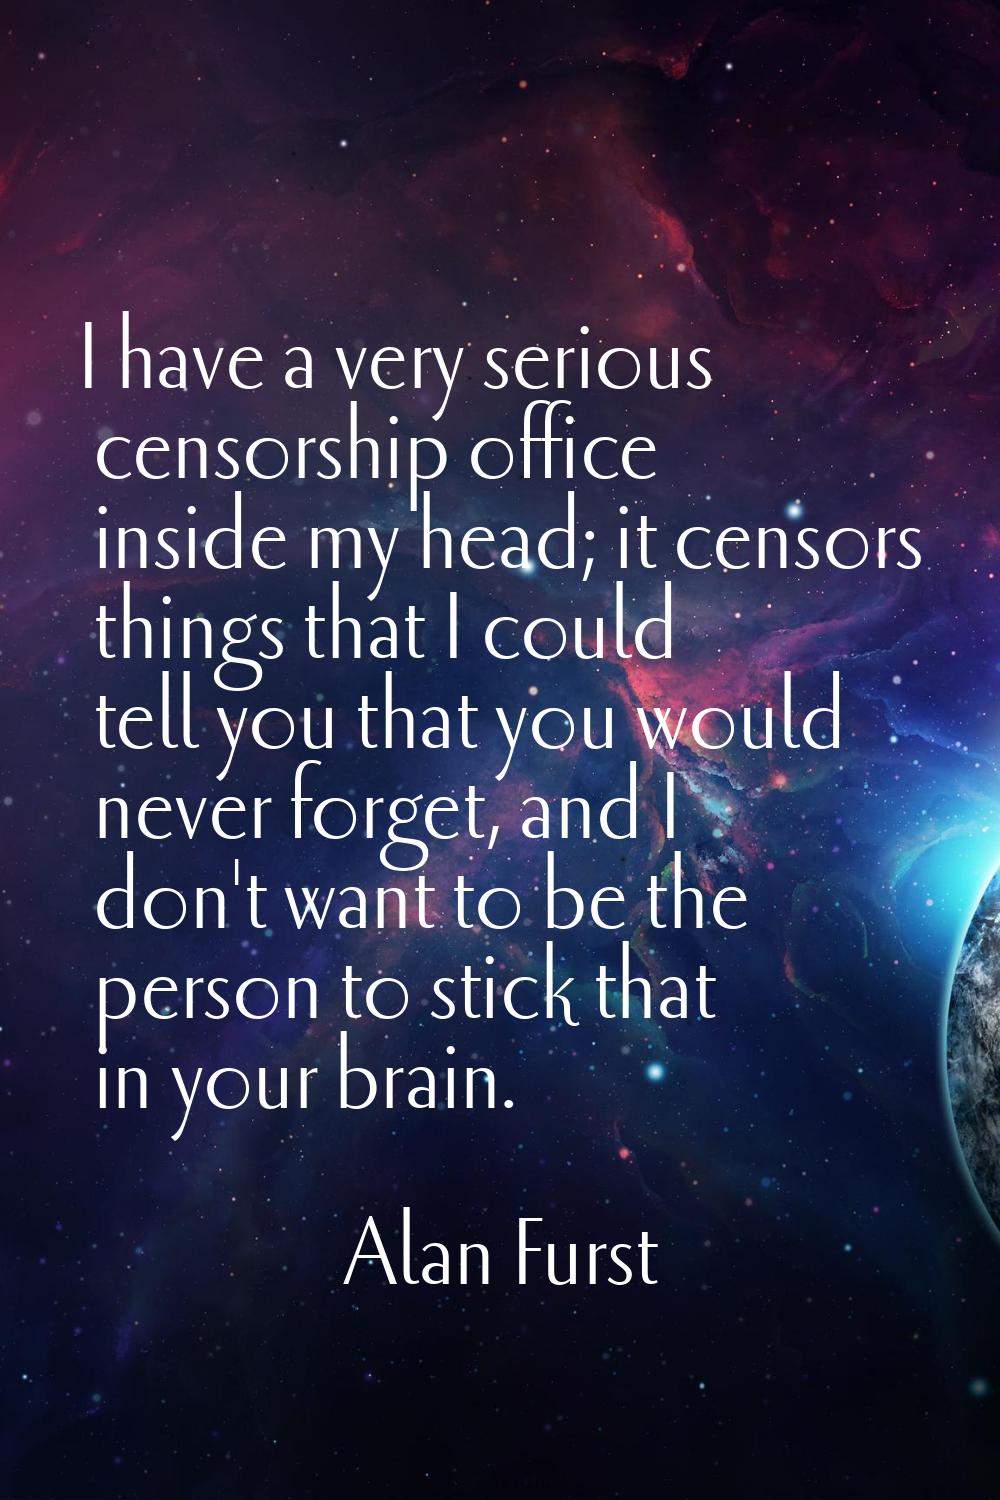 I have a very serious censorship office inside my head; it censors things that I could tell you tha